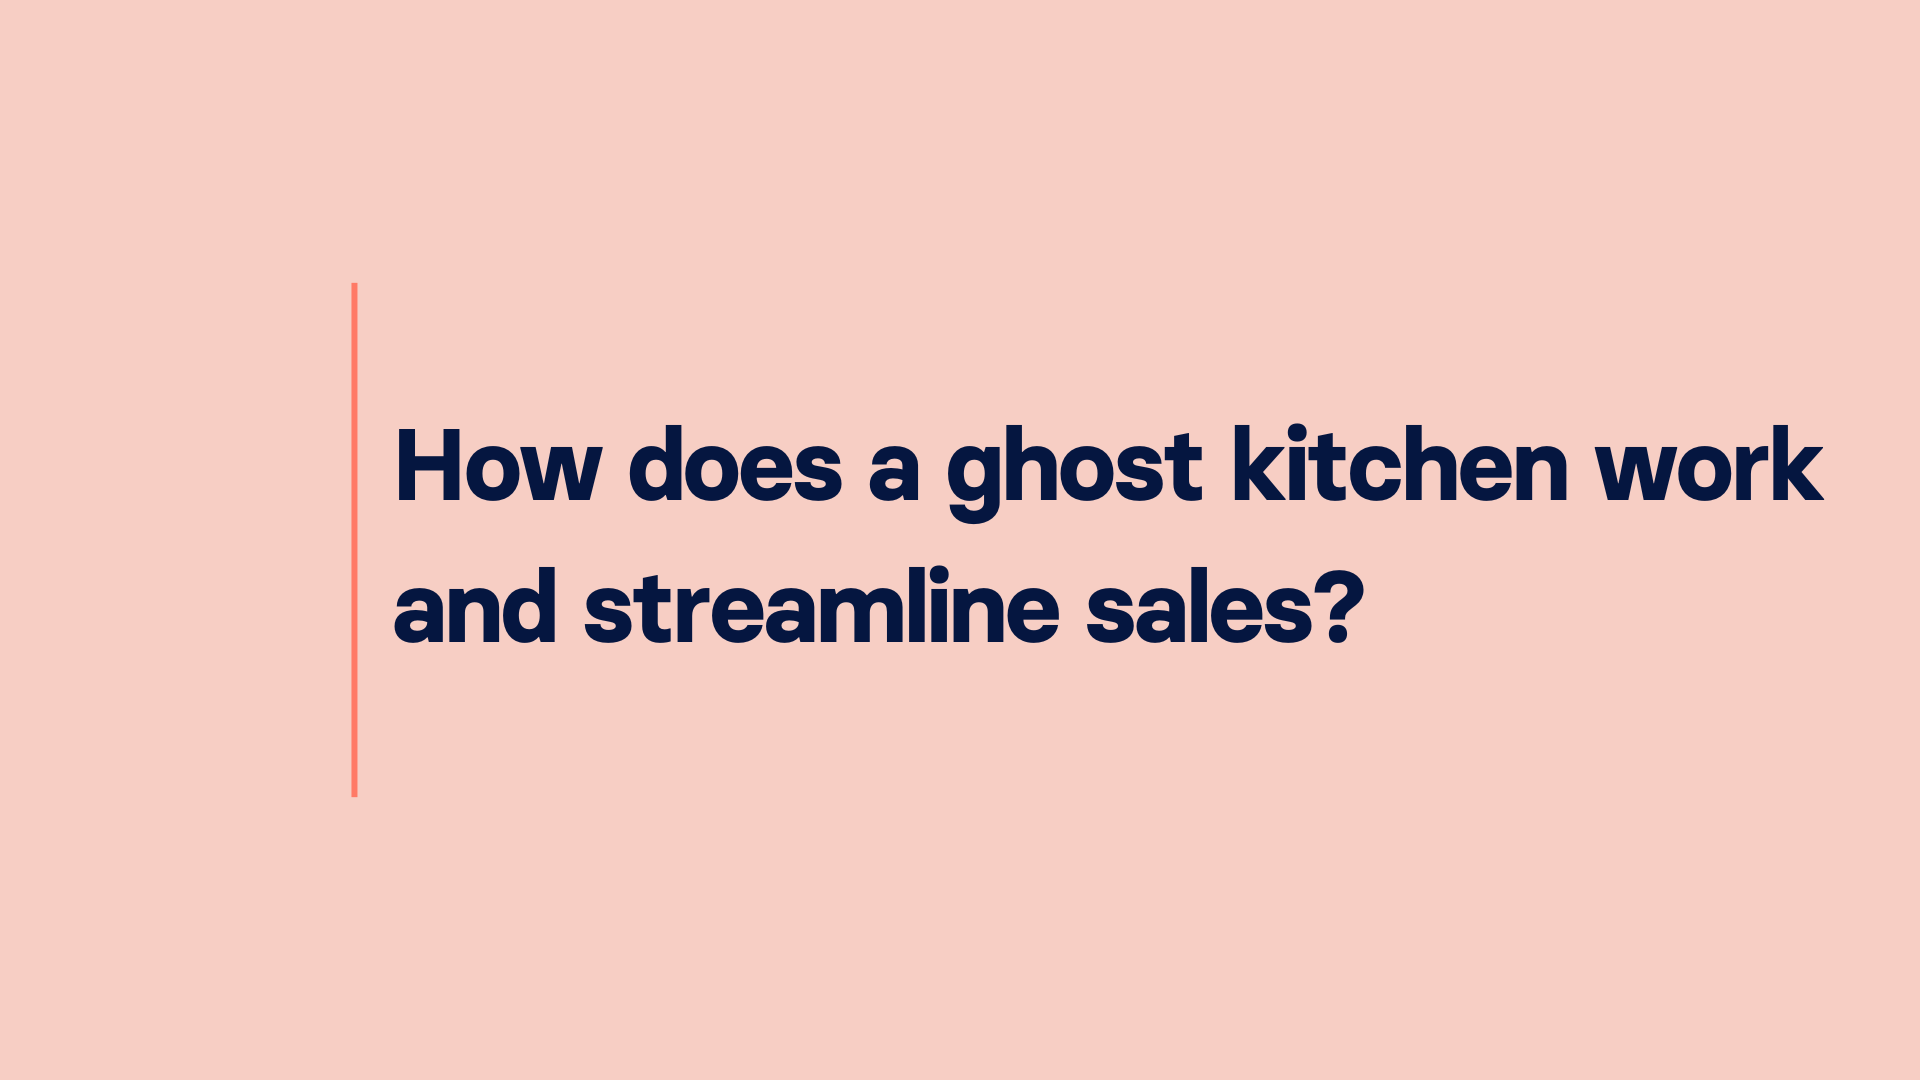 How Does a Ghost Kitchen Work?